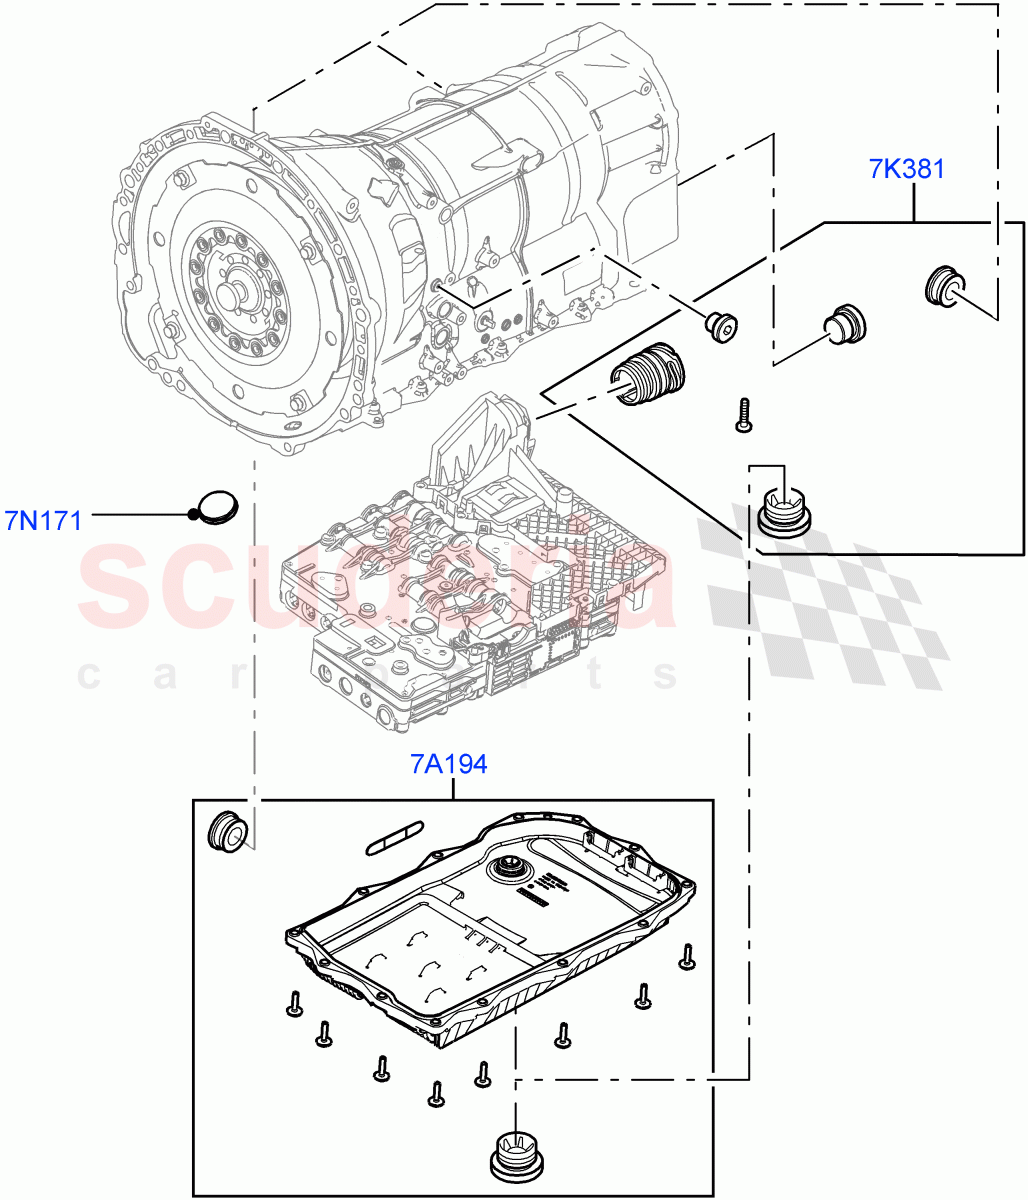 Transmission External Components(Nitra Plant Build)(2.0L I4 DSL HIGH DOHC AJ200,8 Speed Auto Trans ZF 8HP70 4WD,5.0 Petrol AJ133 DOHC CDA)((V)FROMK2000001) of Land Rover Land Rover Defender (2020+) [2.0 Turbo Diesel]